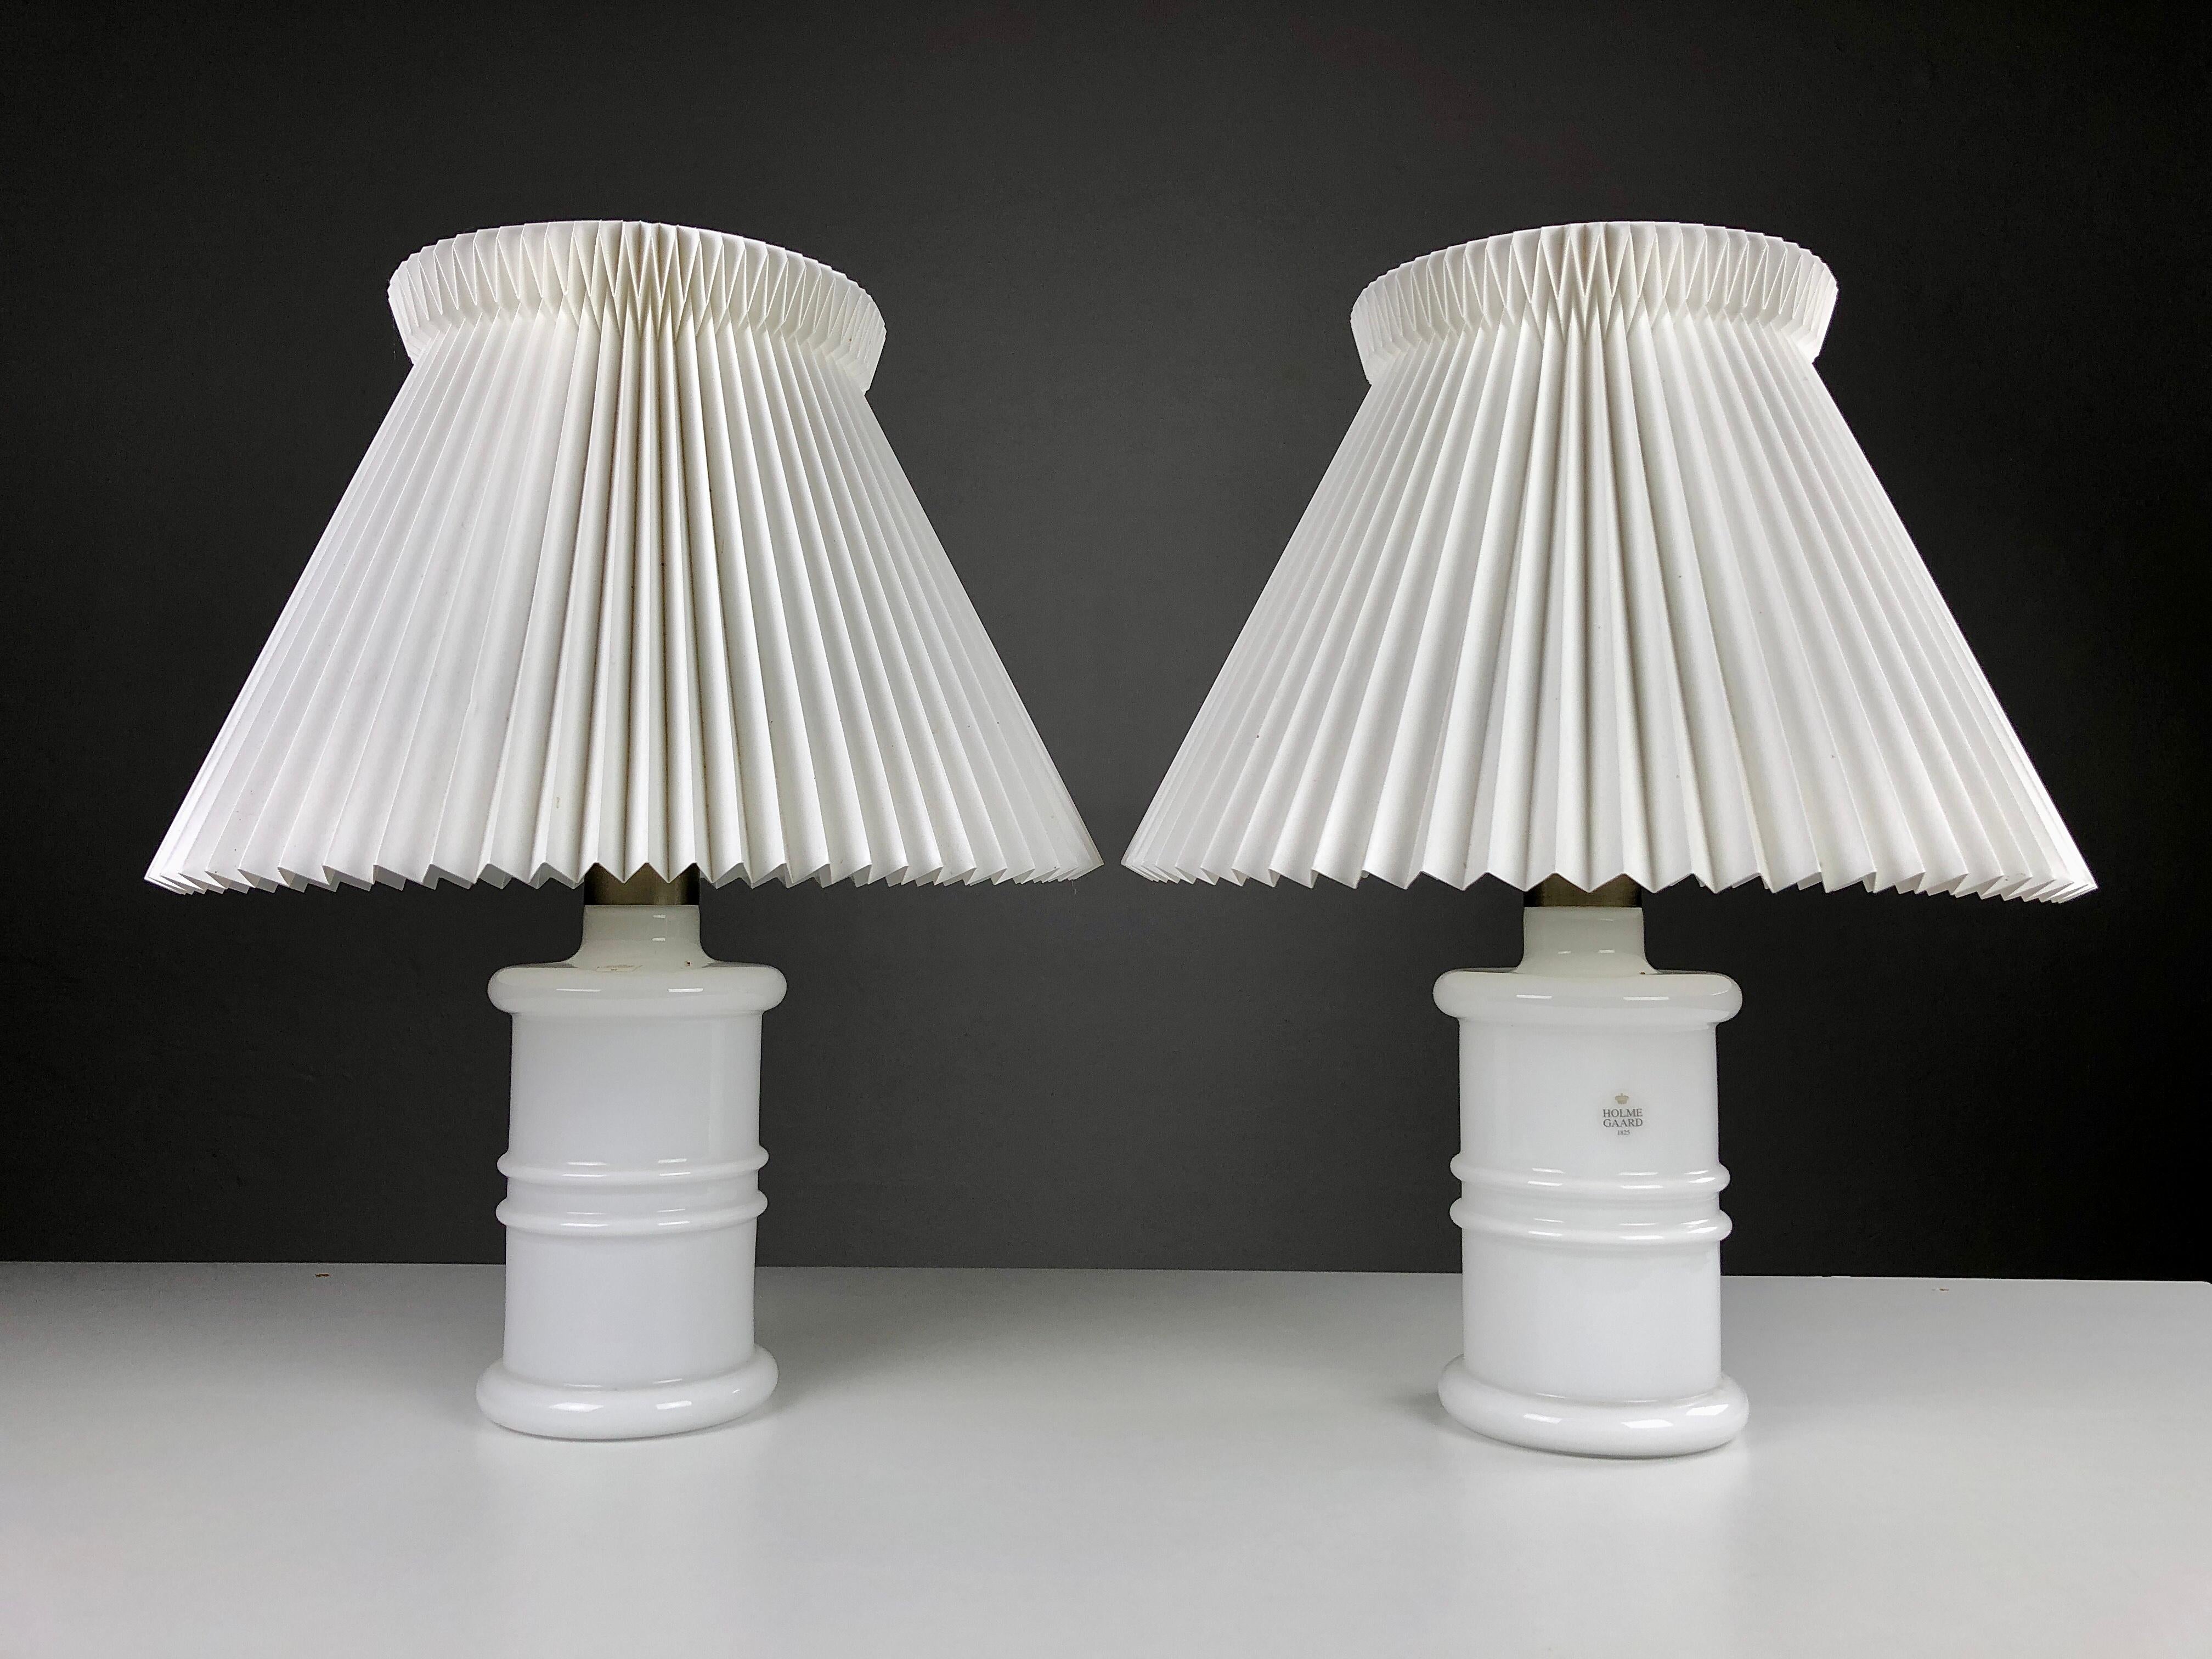 Hand-Crafted 1980s Sidse Werner Danish Handblown Glass Pharmacist Table Lamps by Holmegaard For Sale